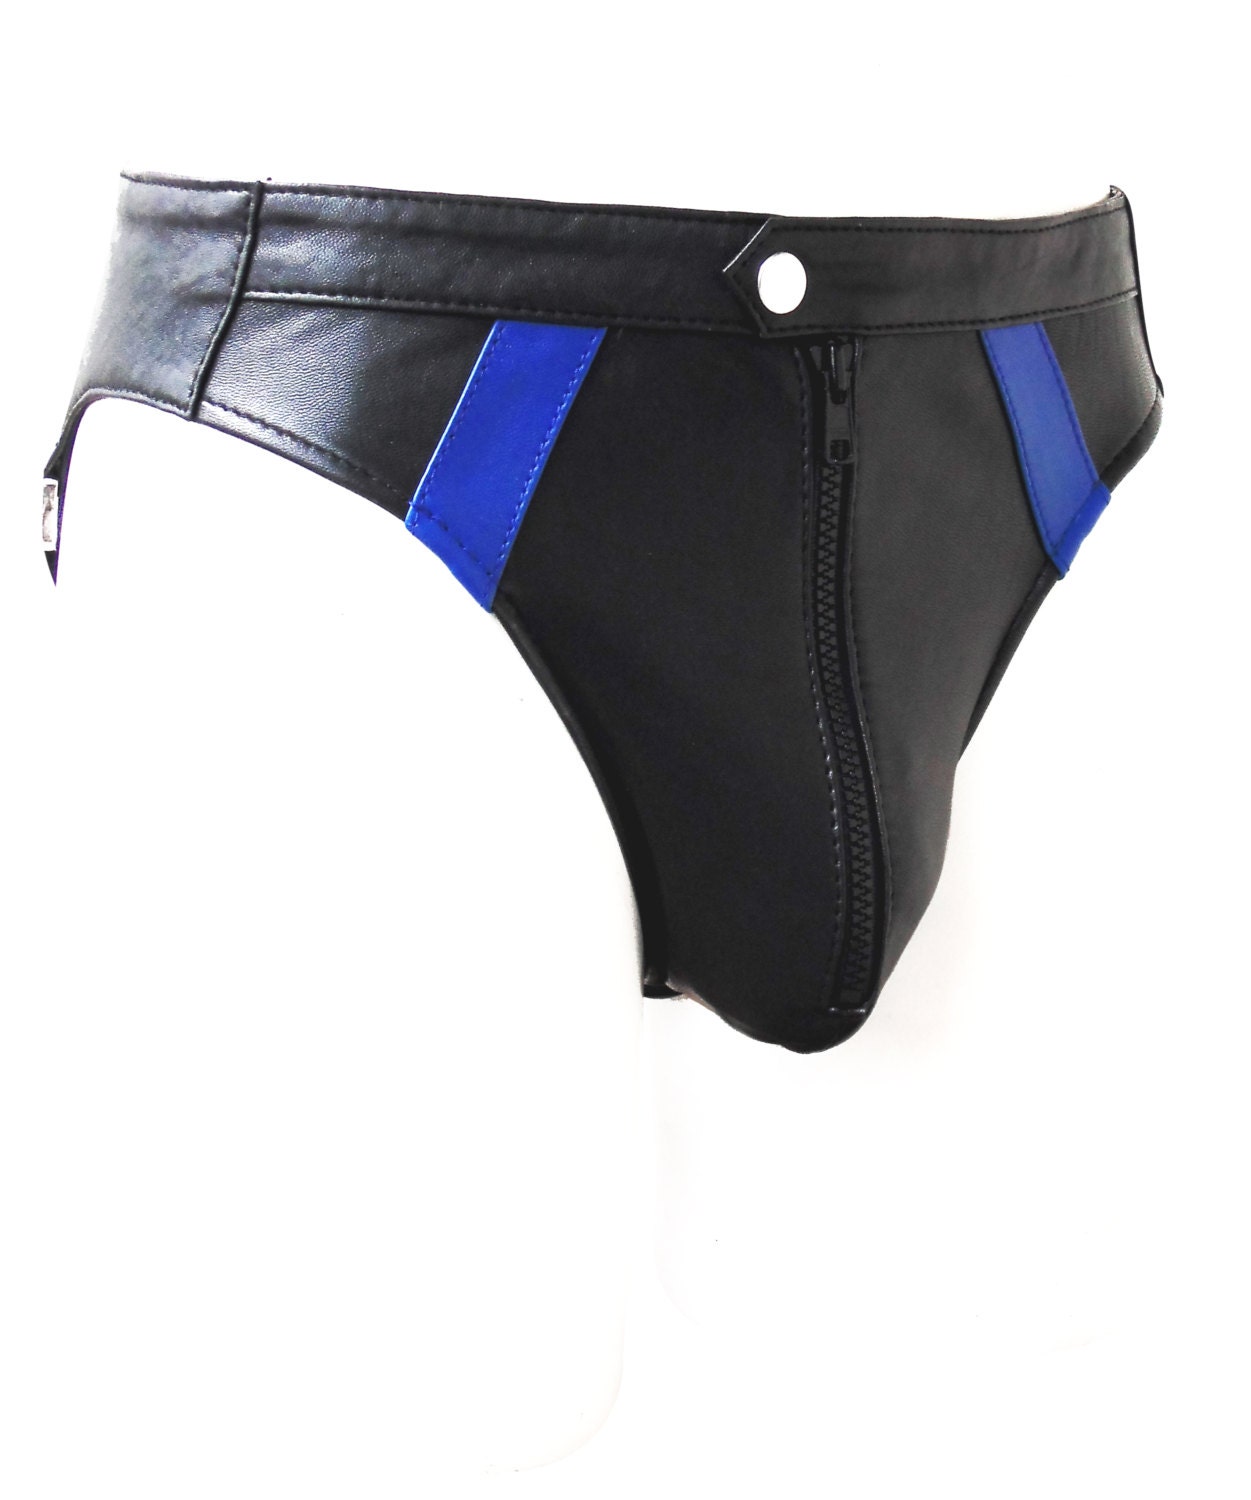 Leather Jockstrap With Colour Stripes Custom Made to Order